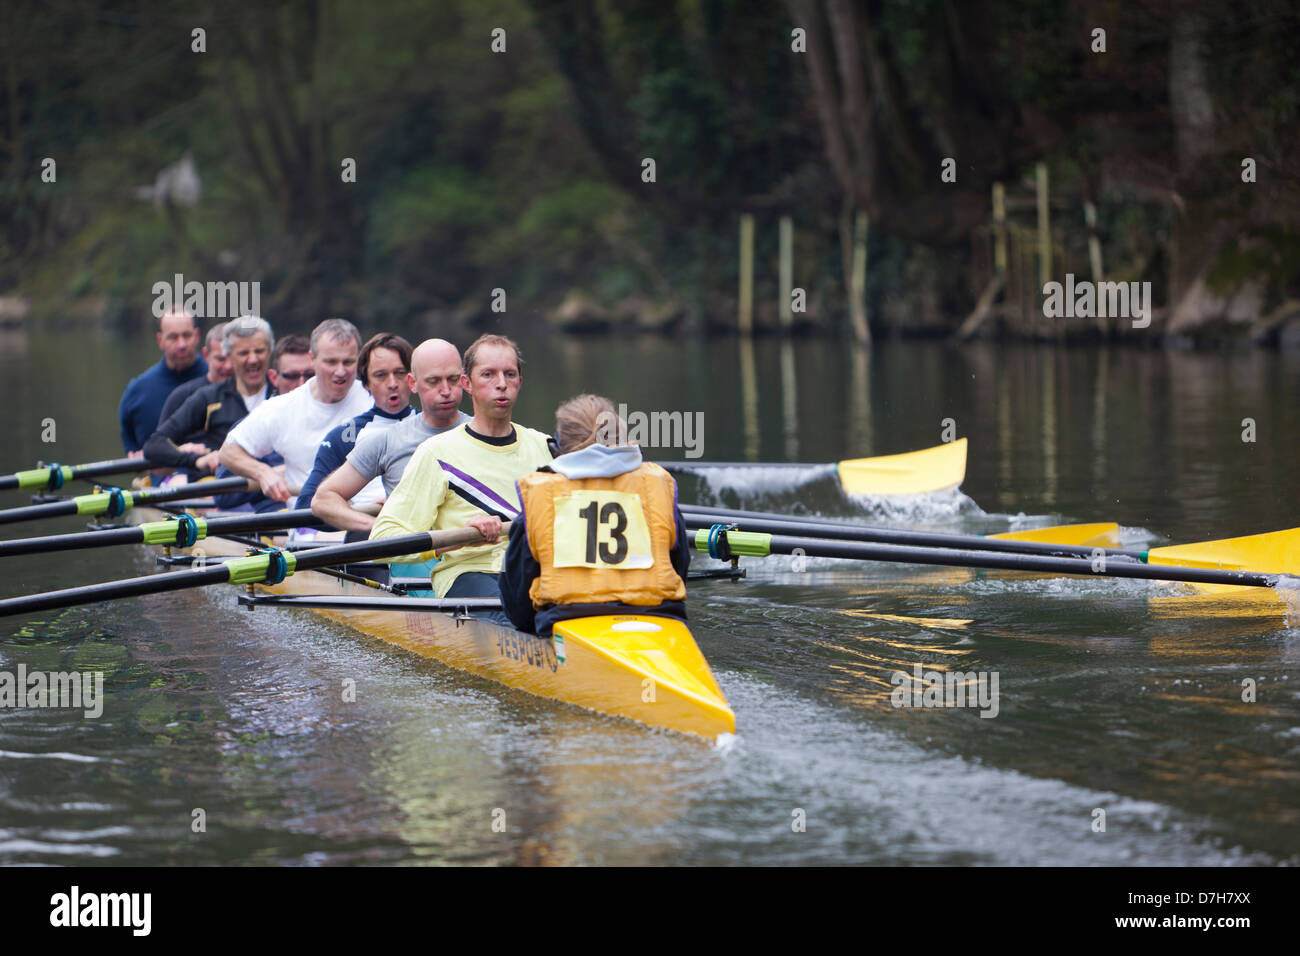 Bath, United Kingdom - March 27, 2011: Members of an amateur sports club row an 8 man sweep boat on the River Avon. Stock Photo